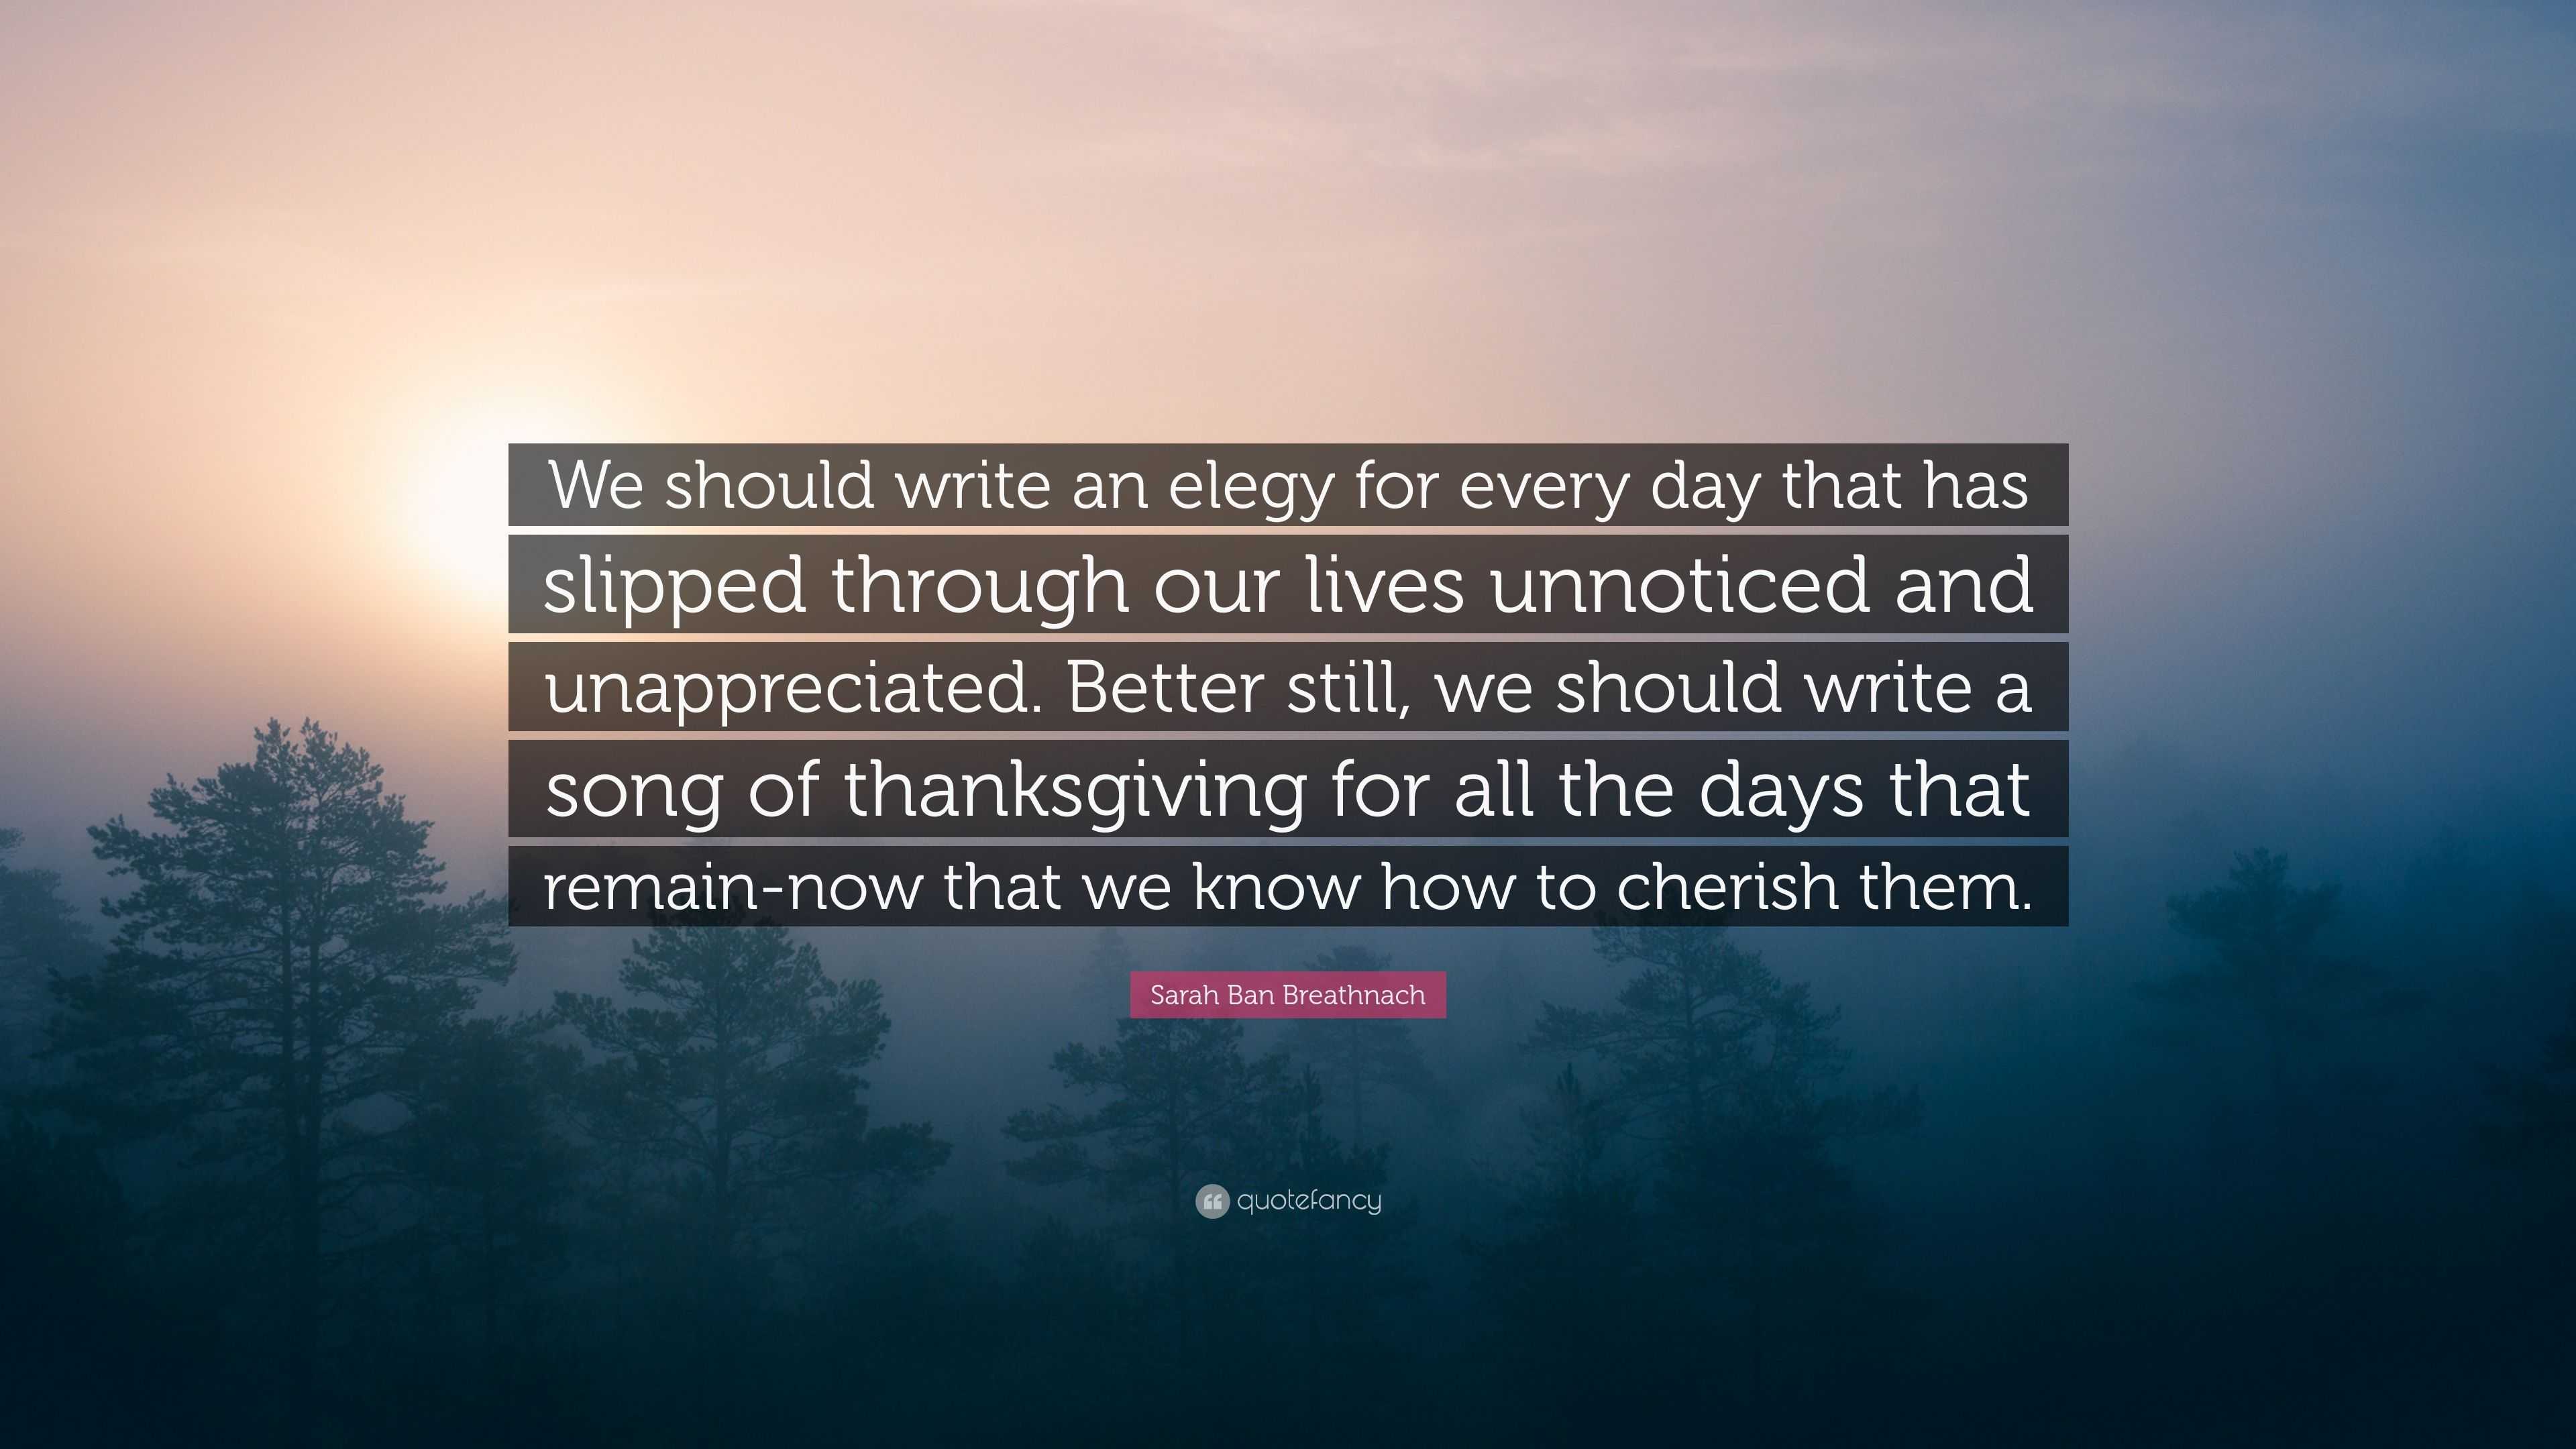 Sarah Ban Breathnach Quote: “We should write an elegy for every